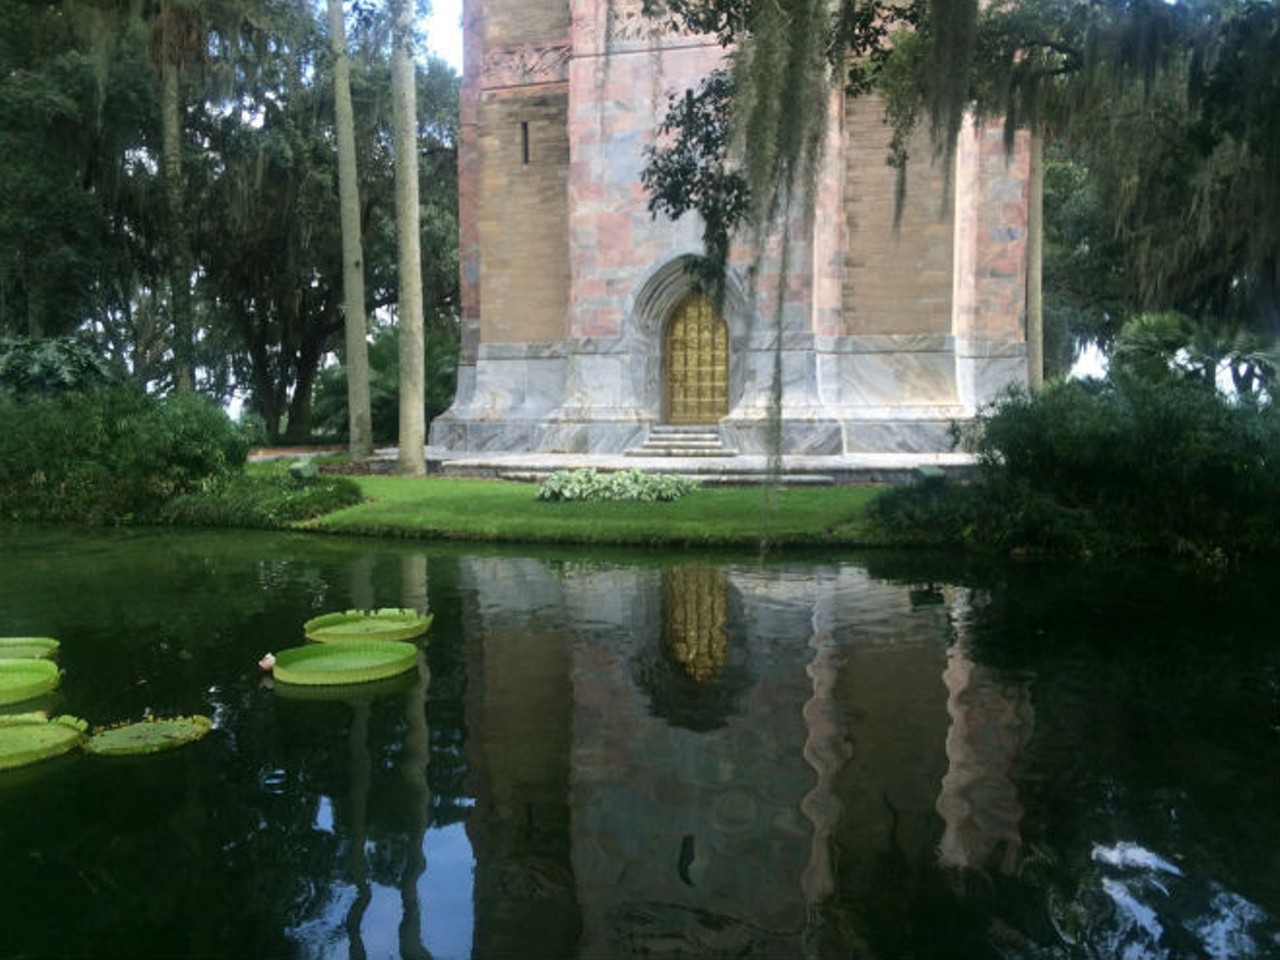 Head south to Lake Wales and check out Bok Tower and its gardens 
Drive time: 1 hr 10 min 
While you're there, visit Spook Hill (where cars mysteriously roll uphill) and the outdoor flea markets along the drive. 
Photo via Facebook